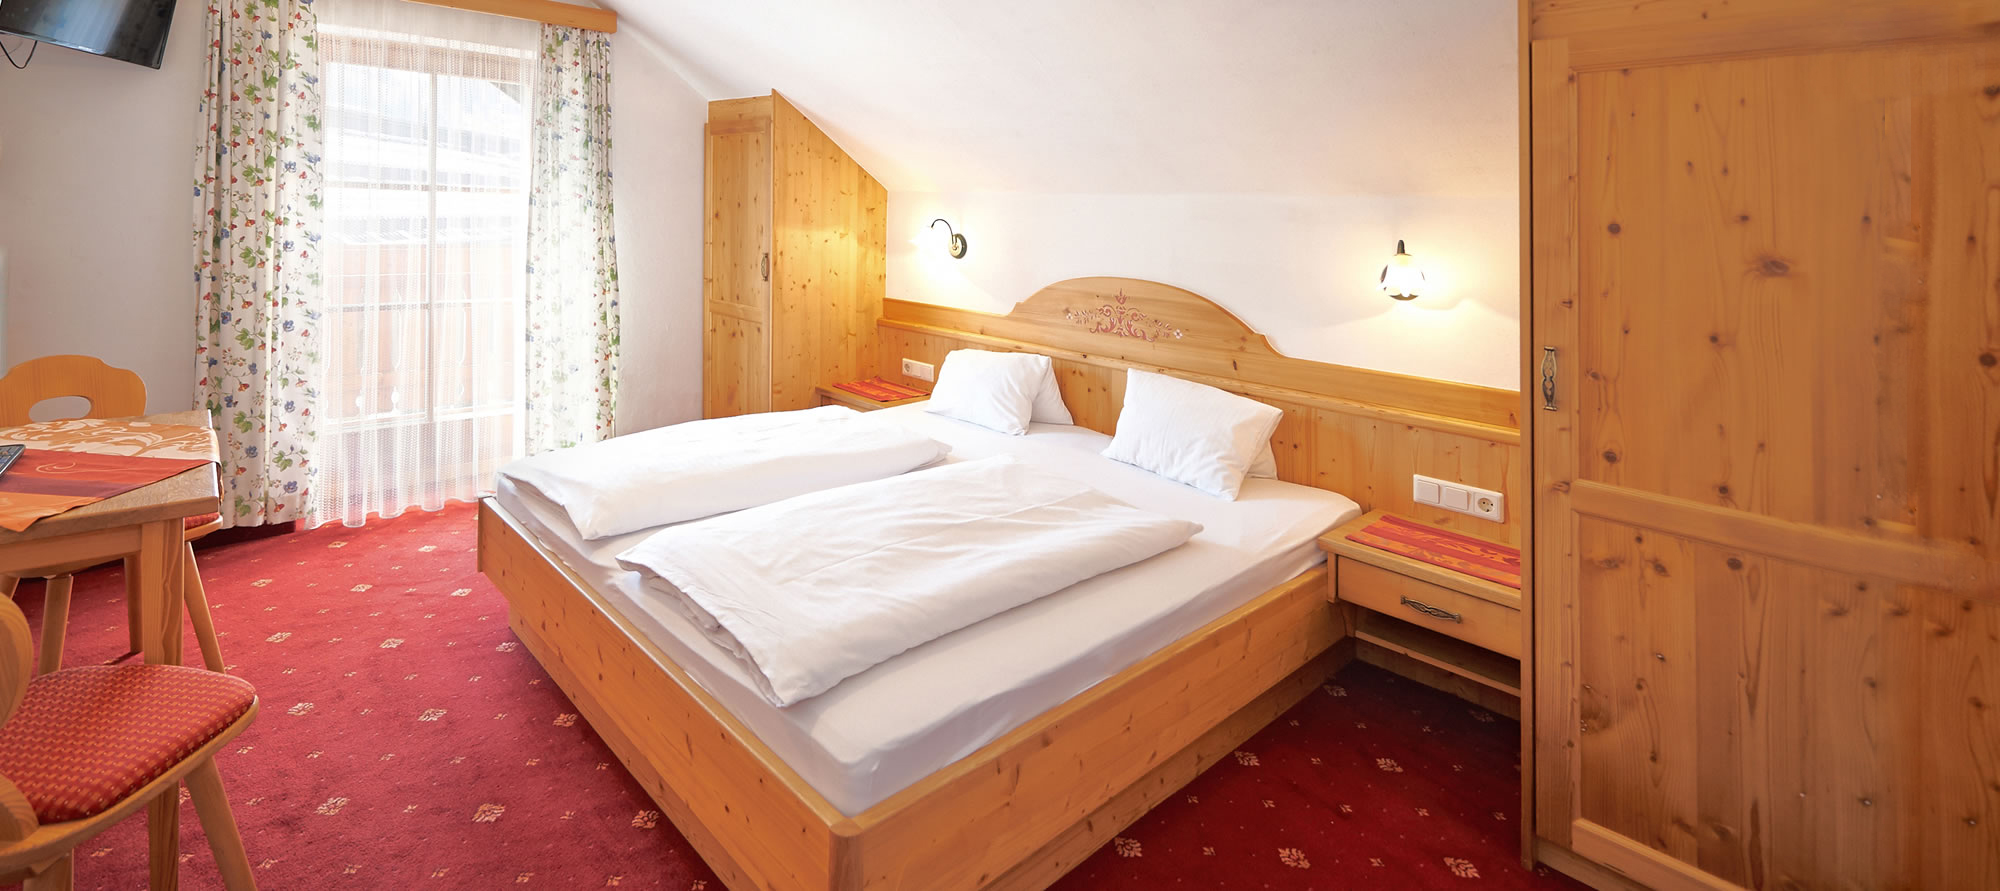 Traditionally furnished rooms at Guesthouse Schrempfgut